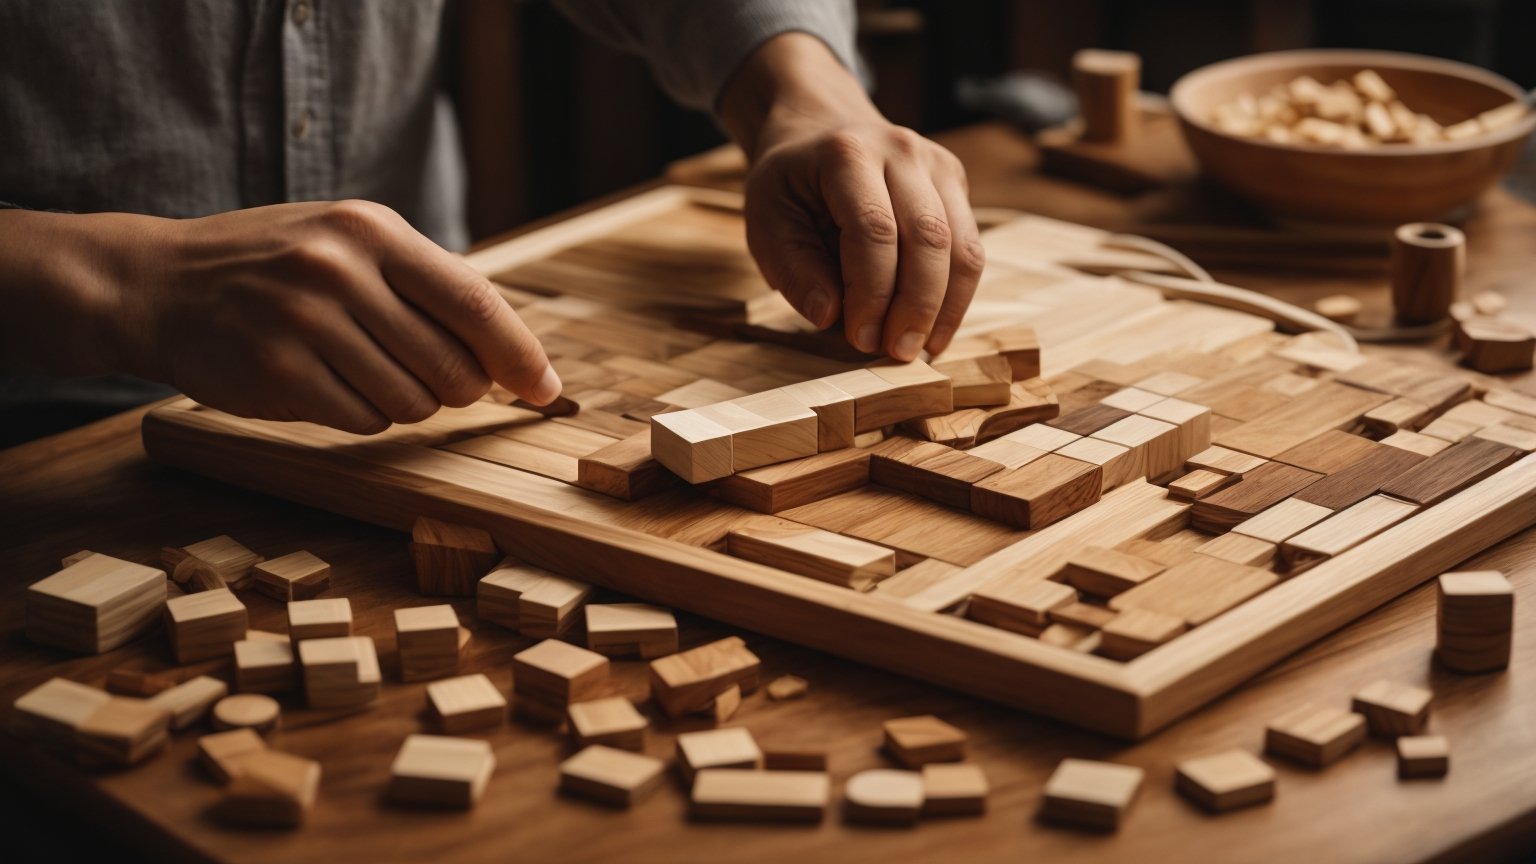 How to Play Wooden Block Puzzle: A Beginner's Guide